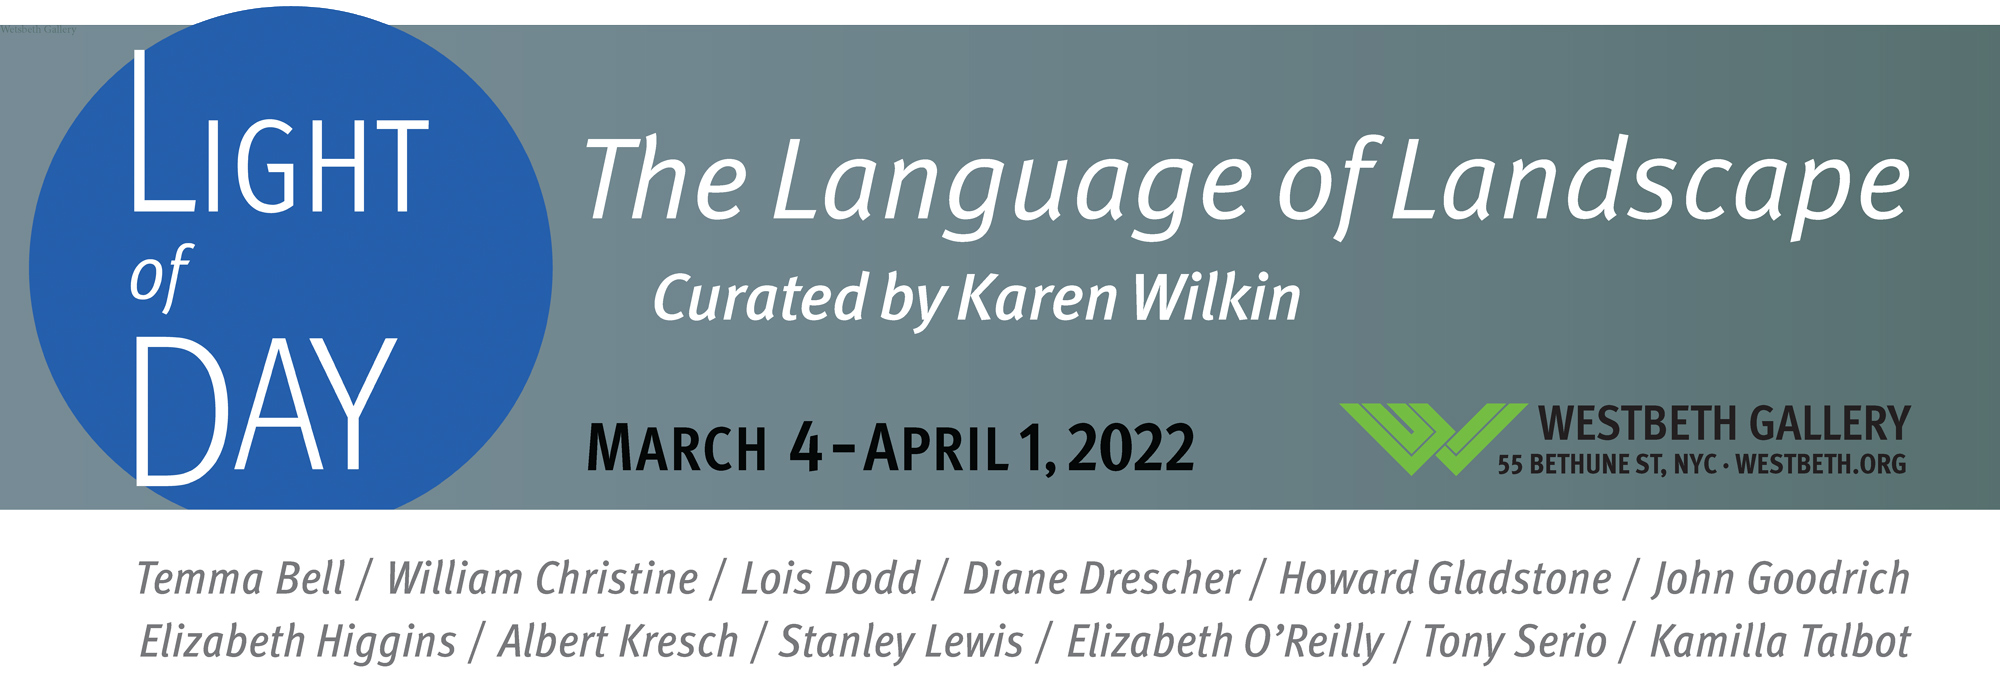 Light Of Day: The Language of Landscape